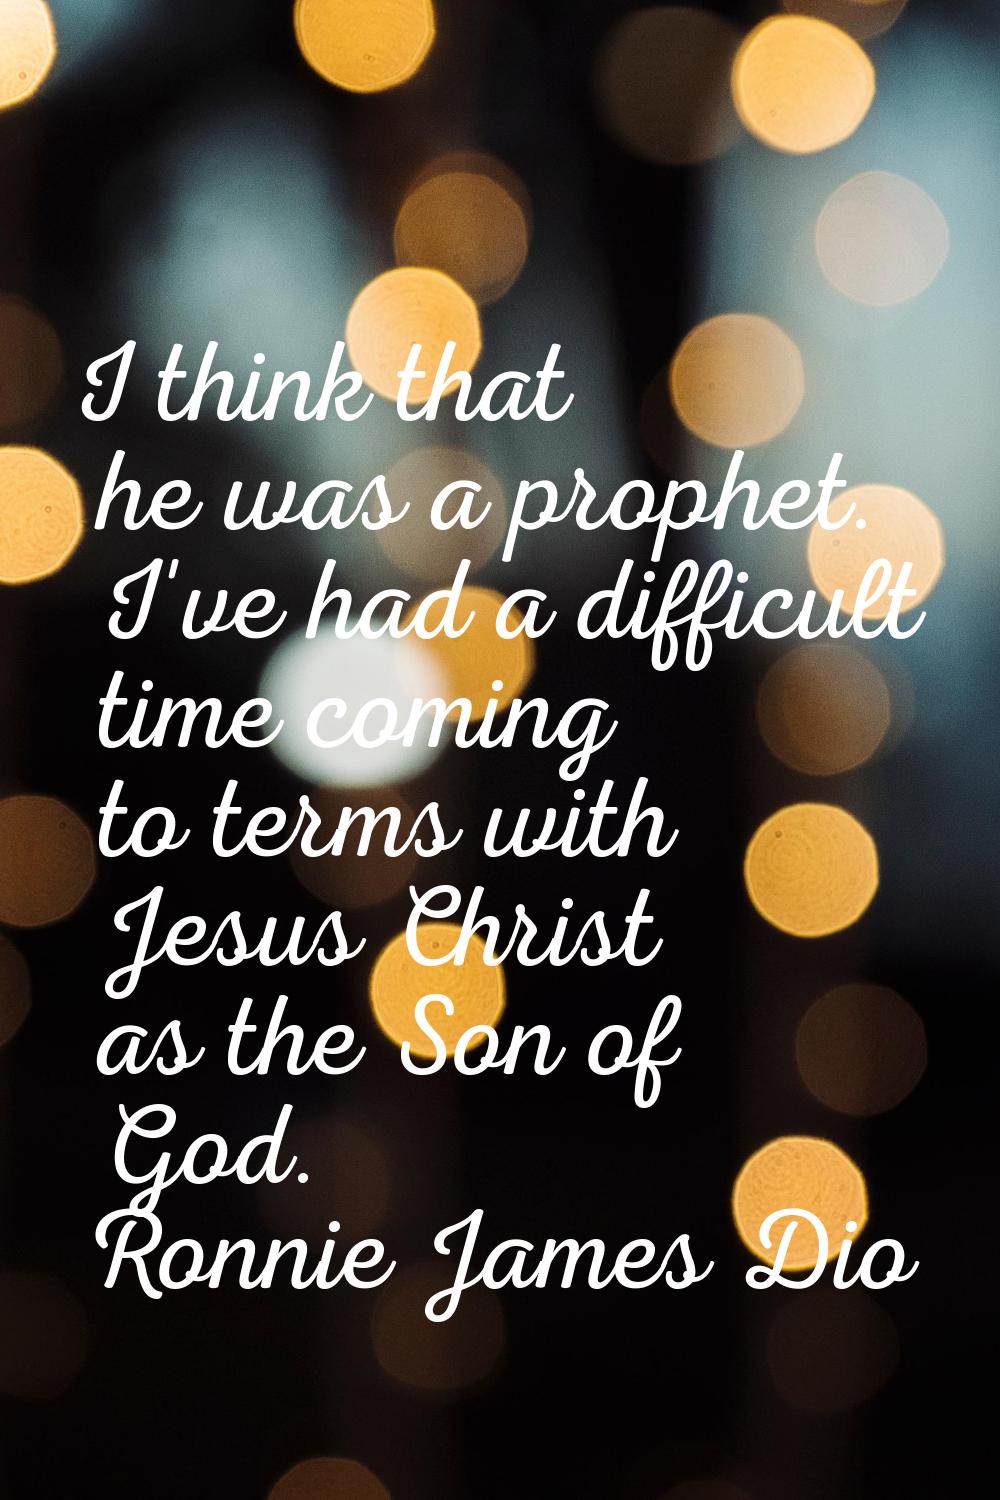 I think that he was a prophet. I've had a difficult time coming to terms with Jesus Christ as the S